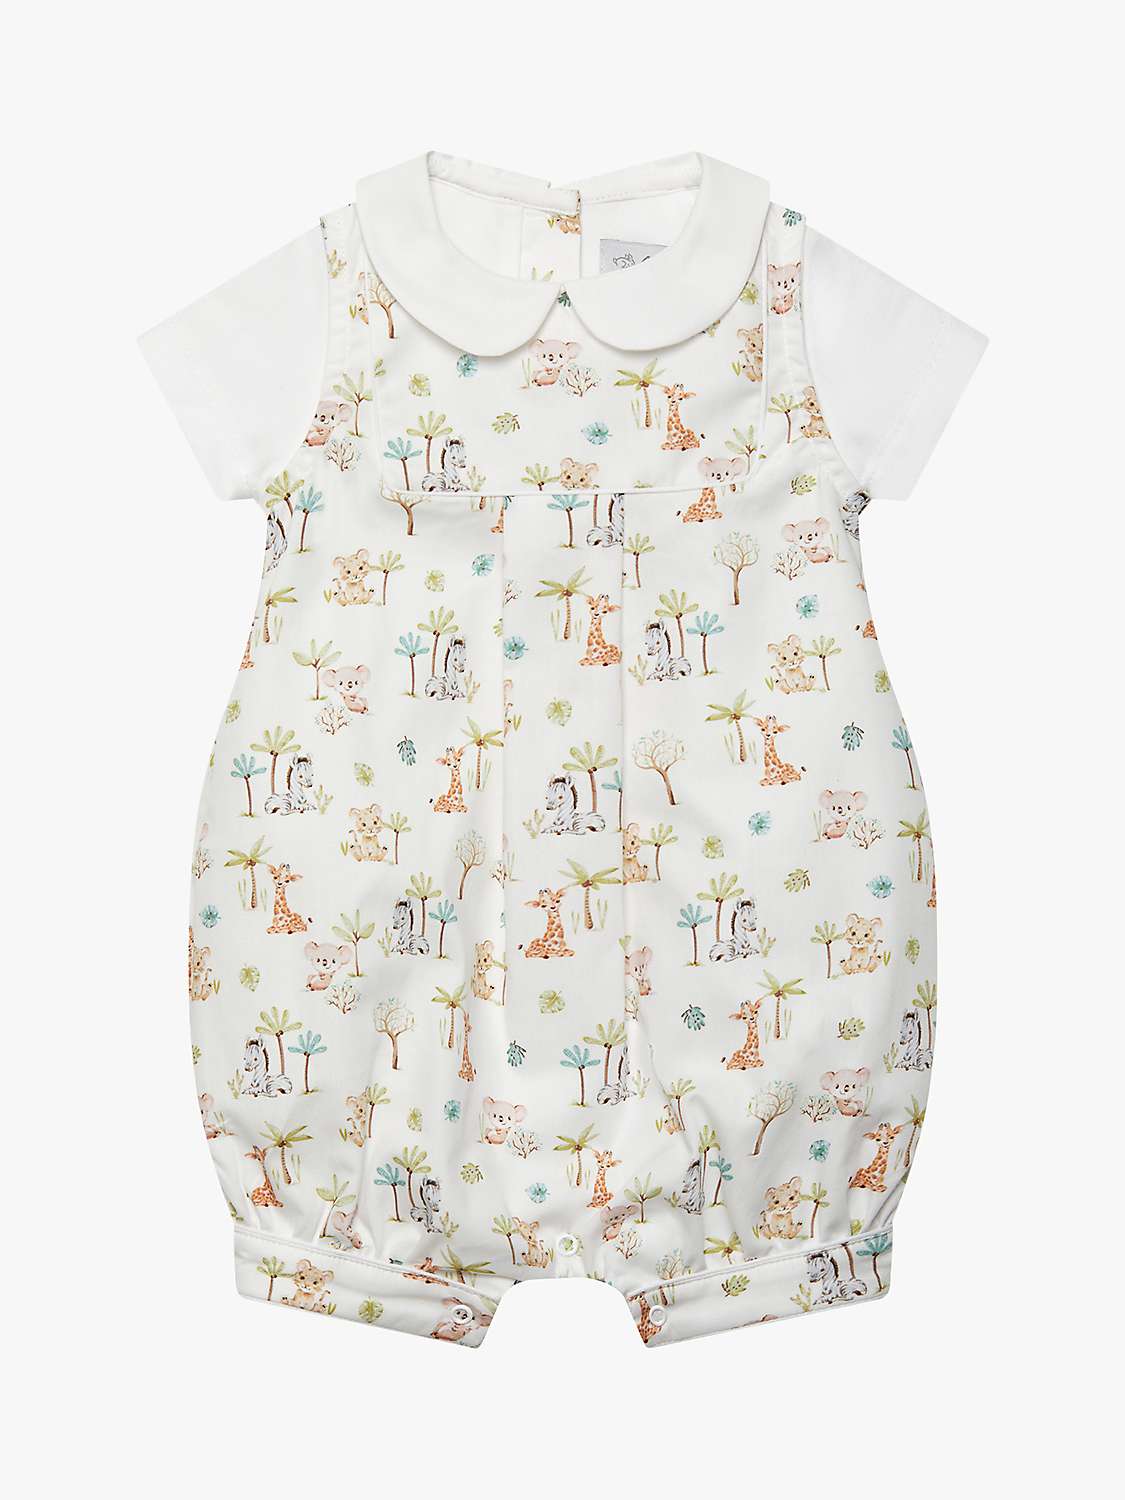 Buy Trotters Baby Augustus And Friends Romper, White/Multi Online at johnlewis.com